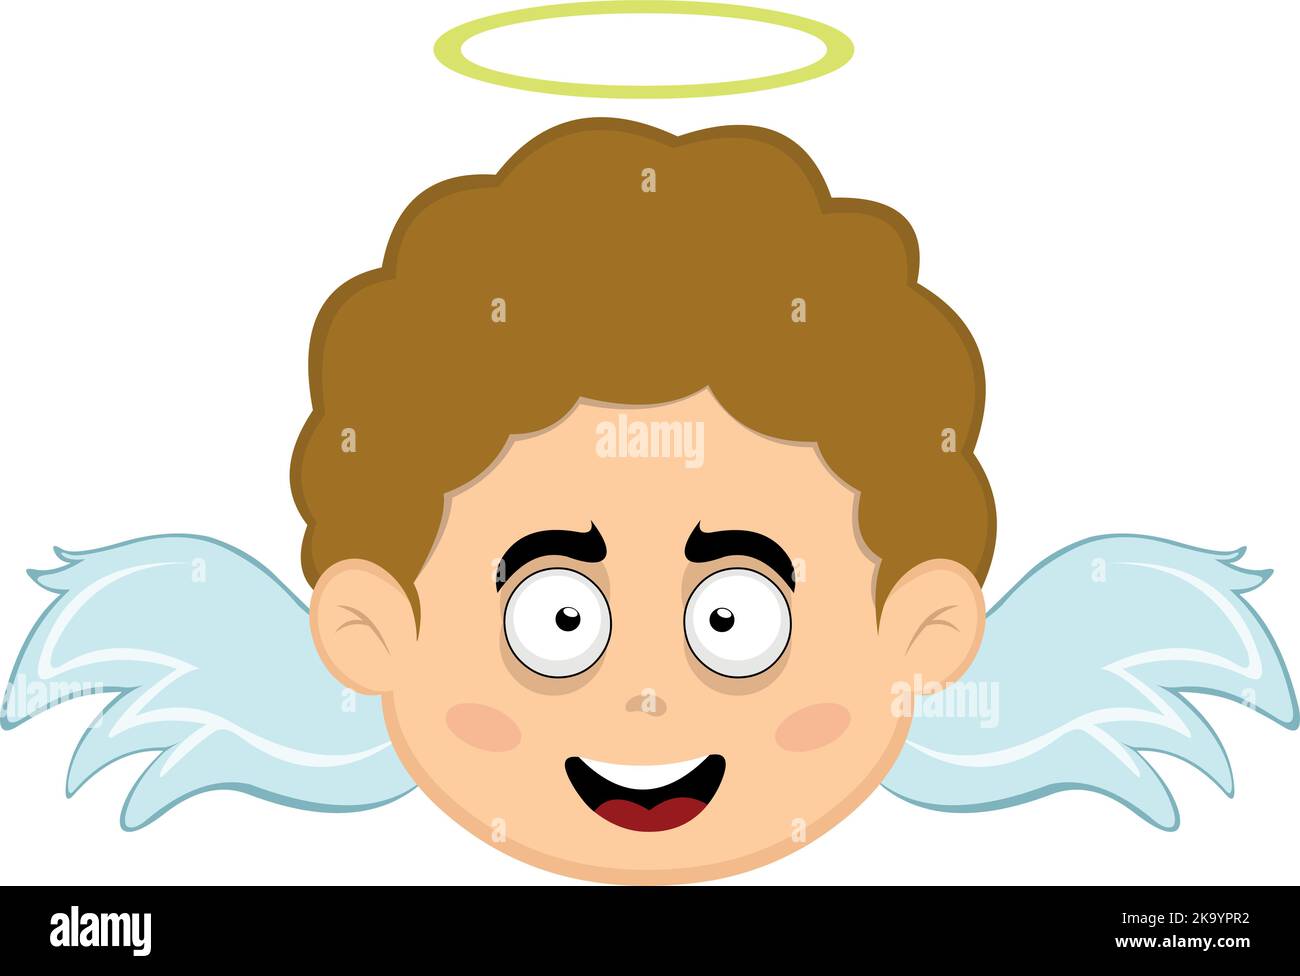 Vector illustration of the face of a child angel cartoon with a happy expression Stock Vector